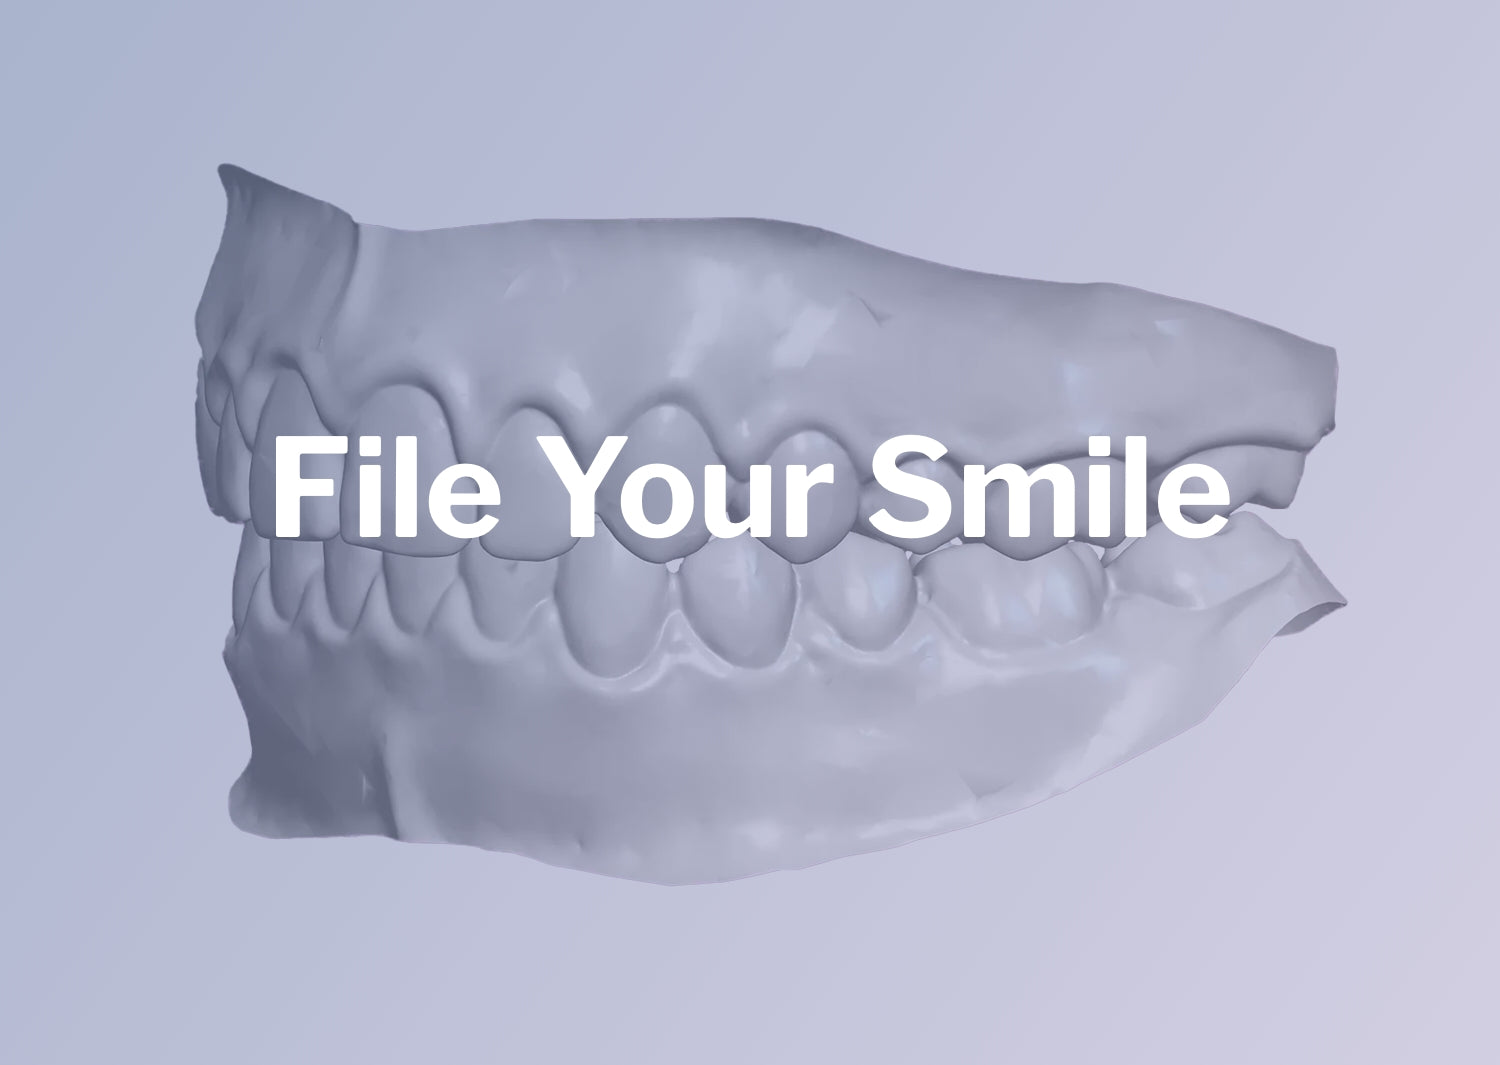 REORDER With "File Your Smile"